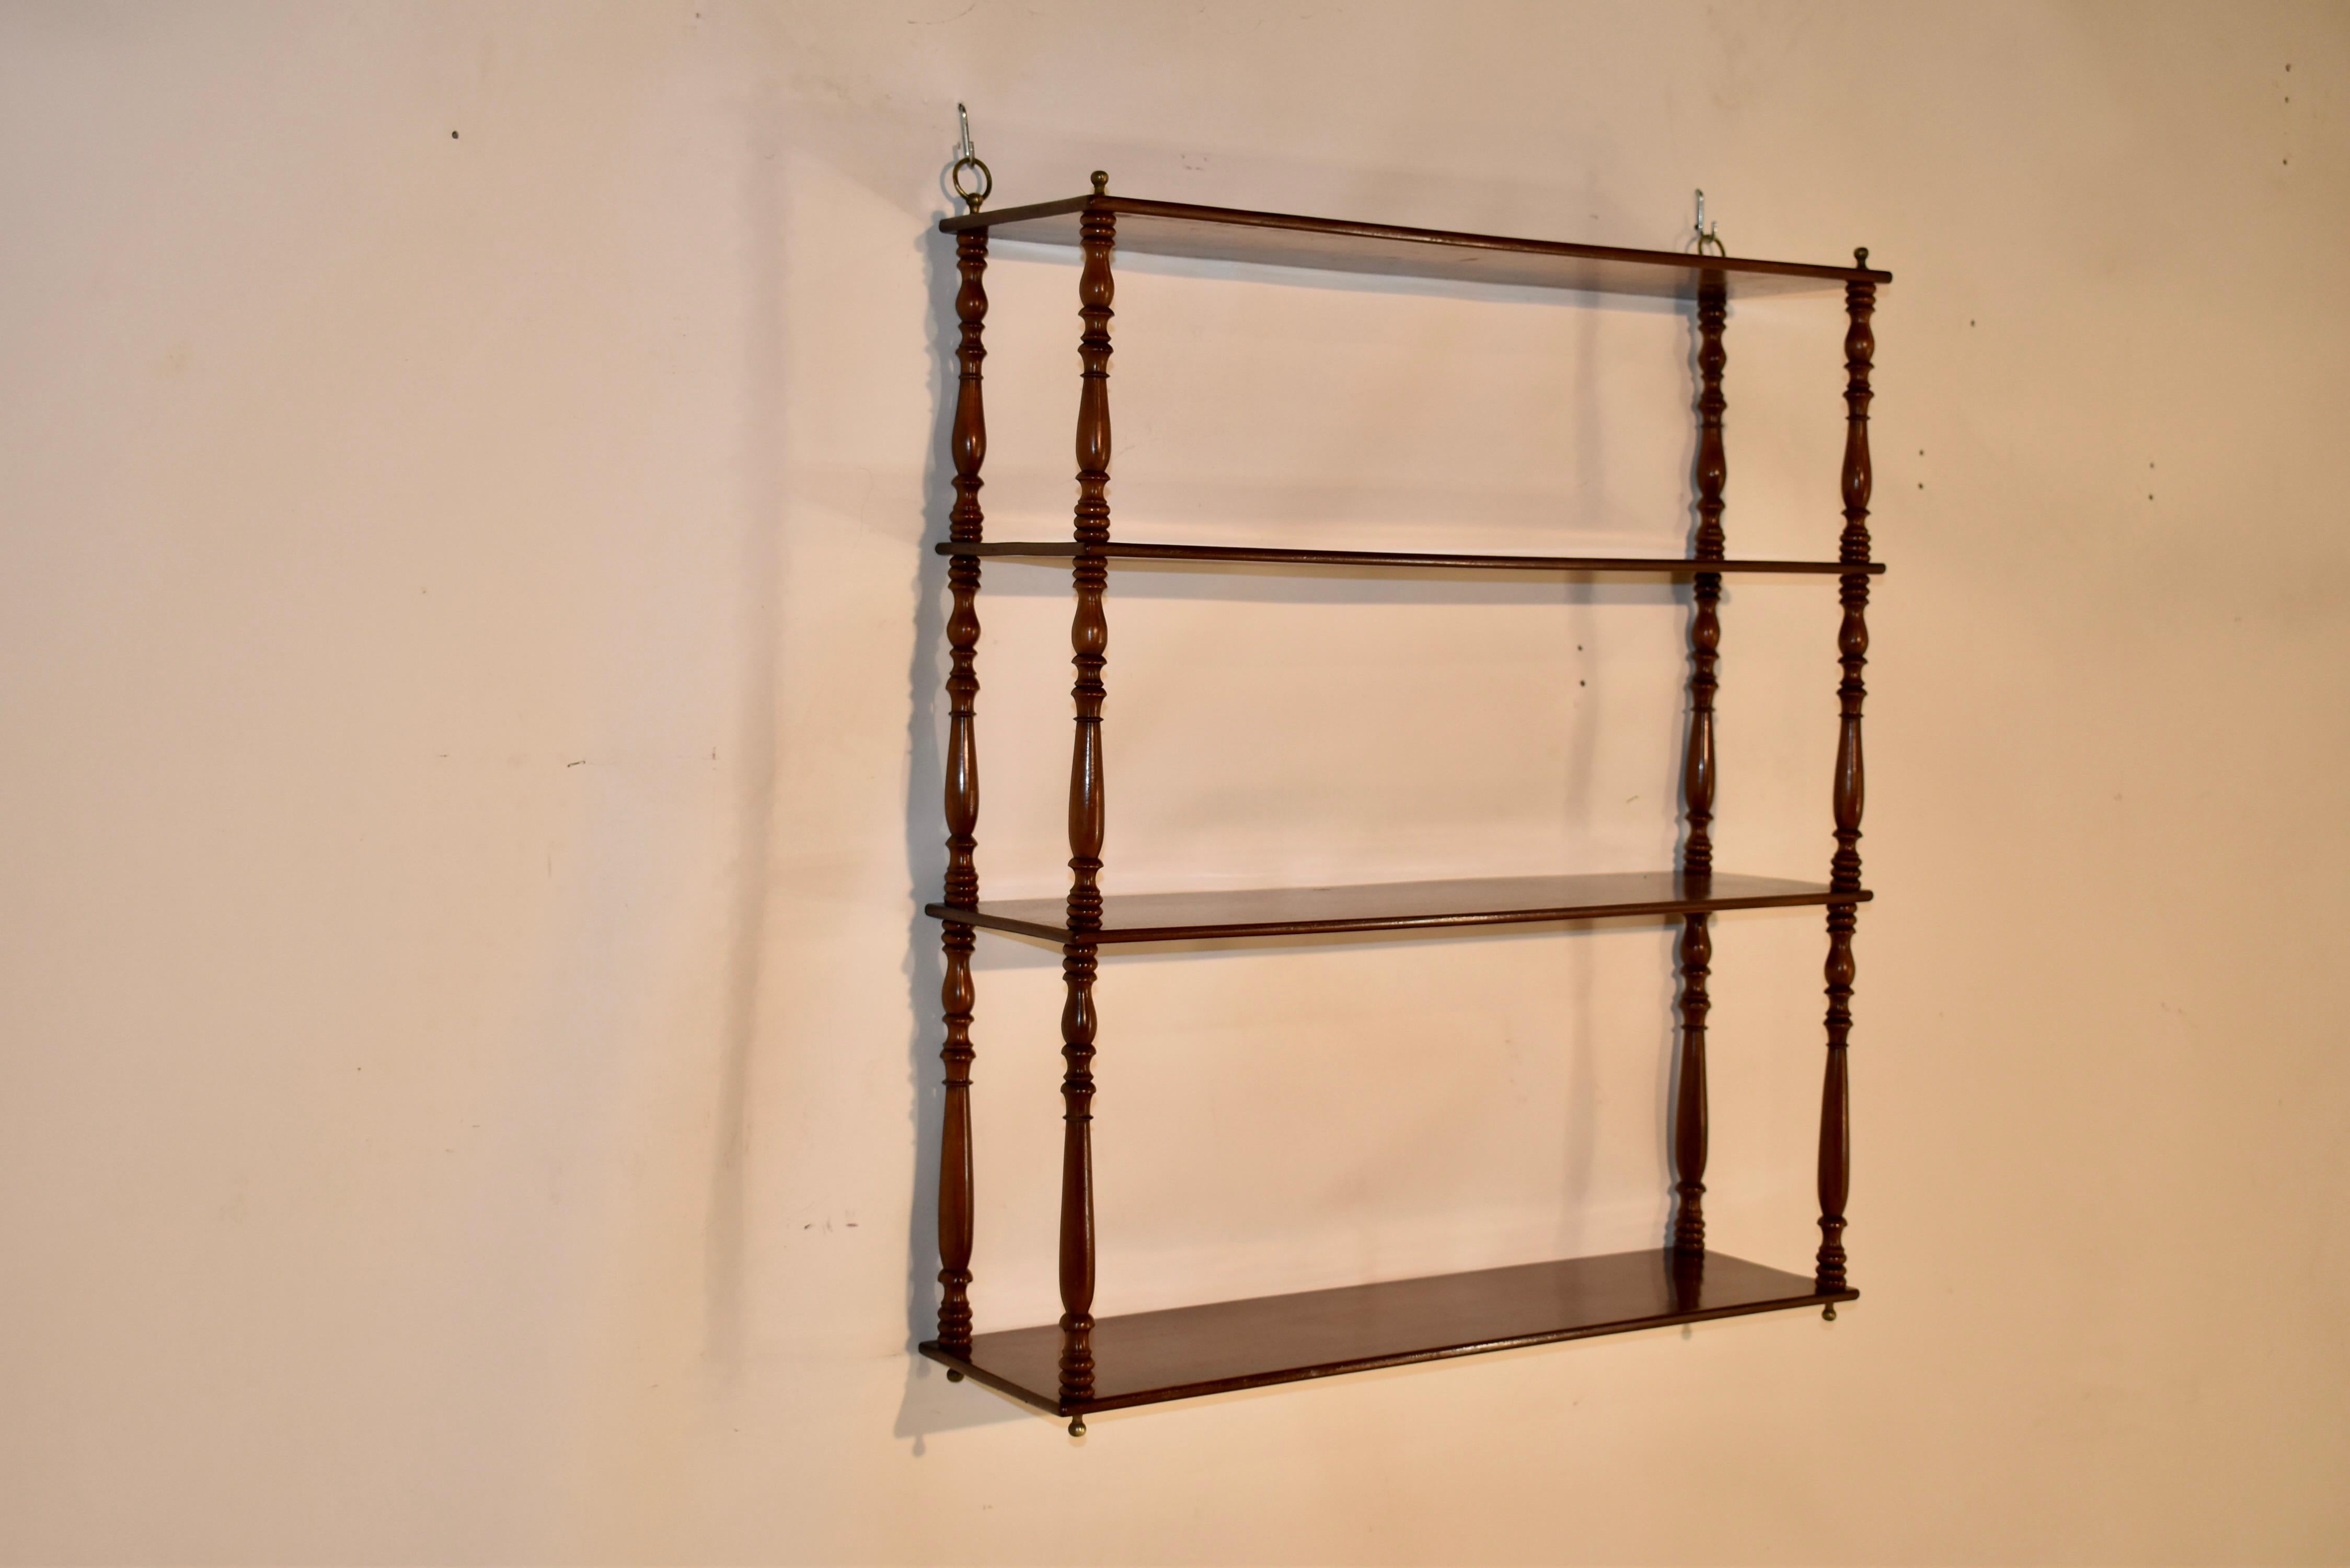 19th century mahogany hanging wall shelf from England. The hanging shelf has four shelves, all single mahogany boards, separated by hand turned shelf supports and decorated with brass finials on the top and bottom. Original hanging rings on the top